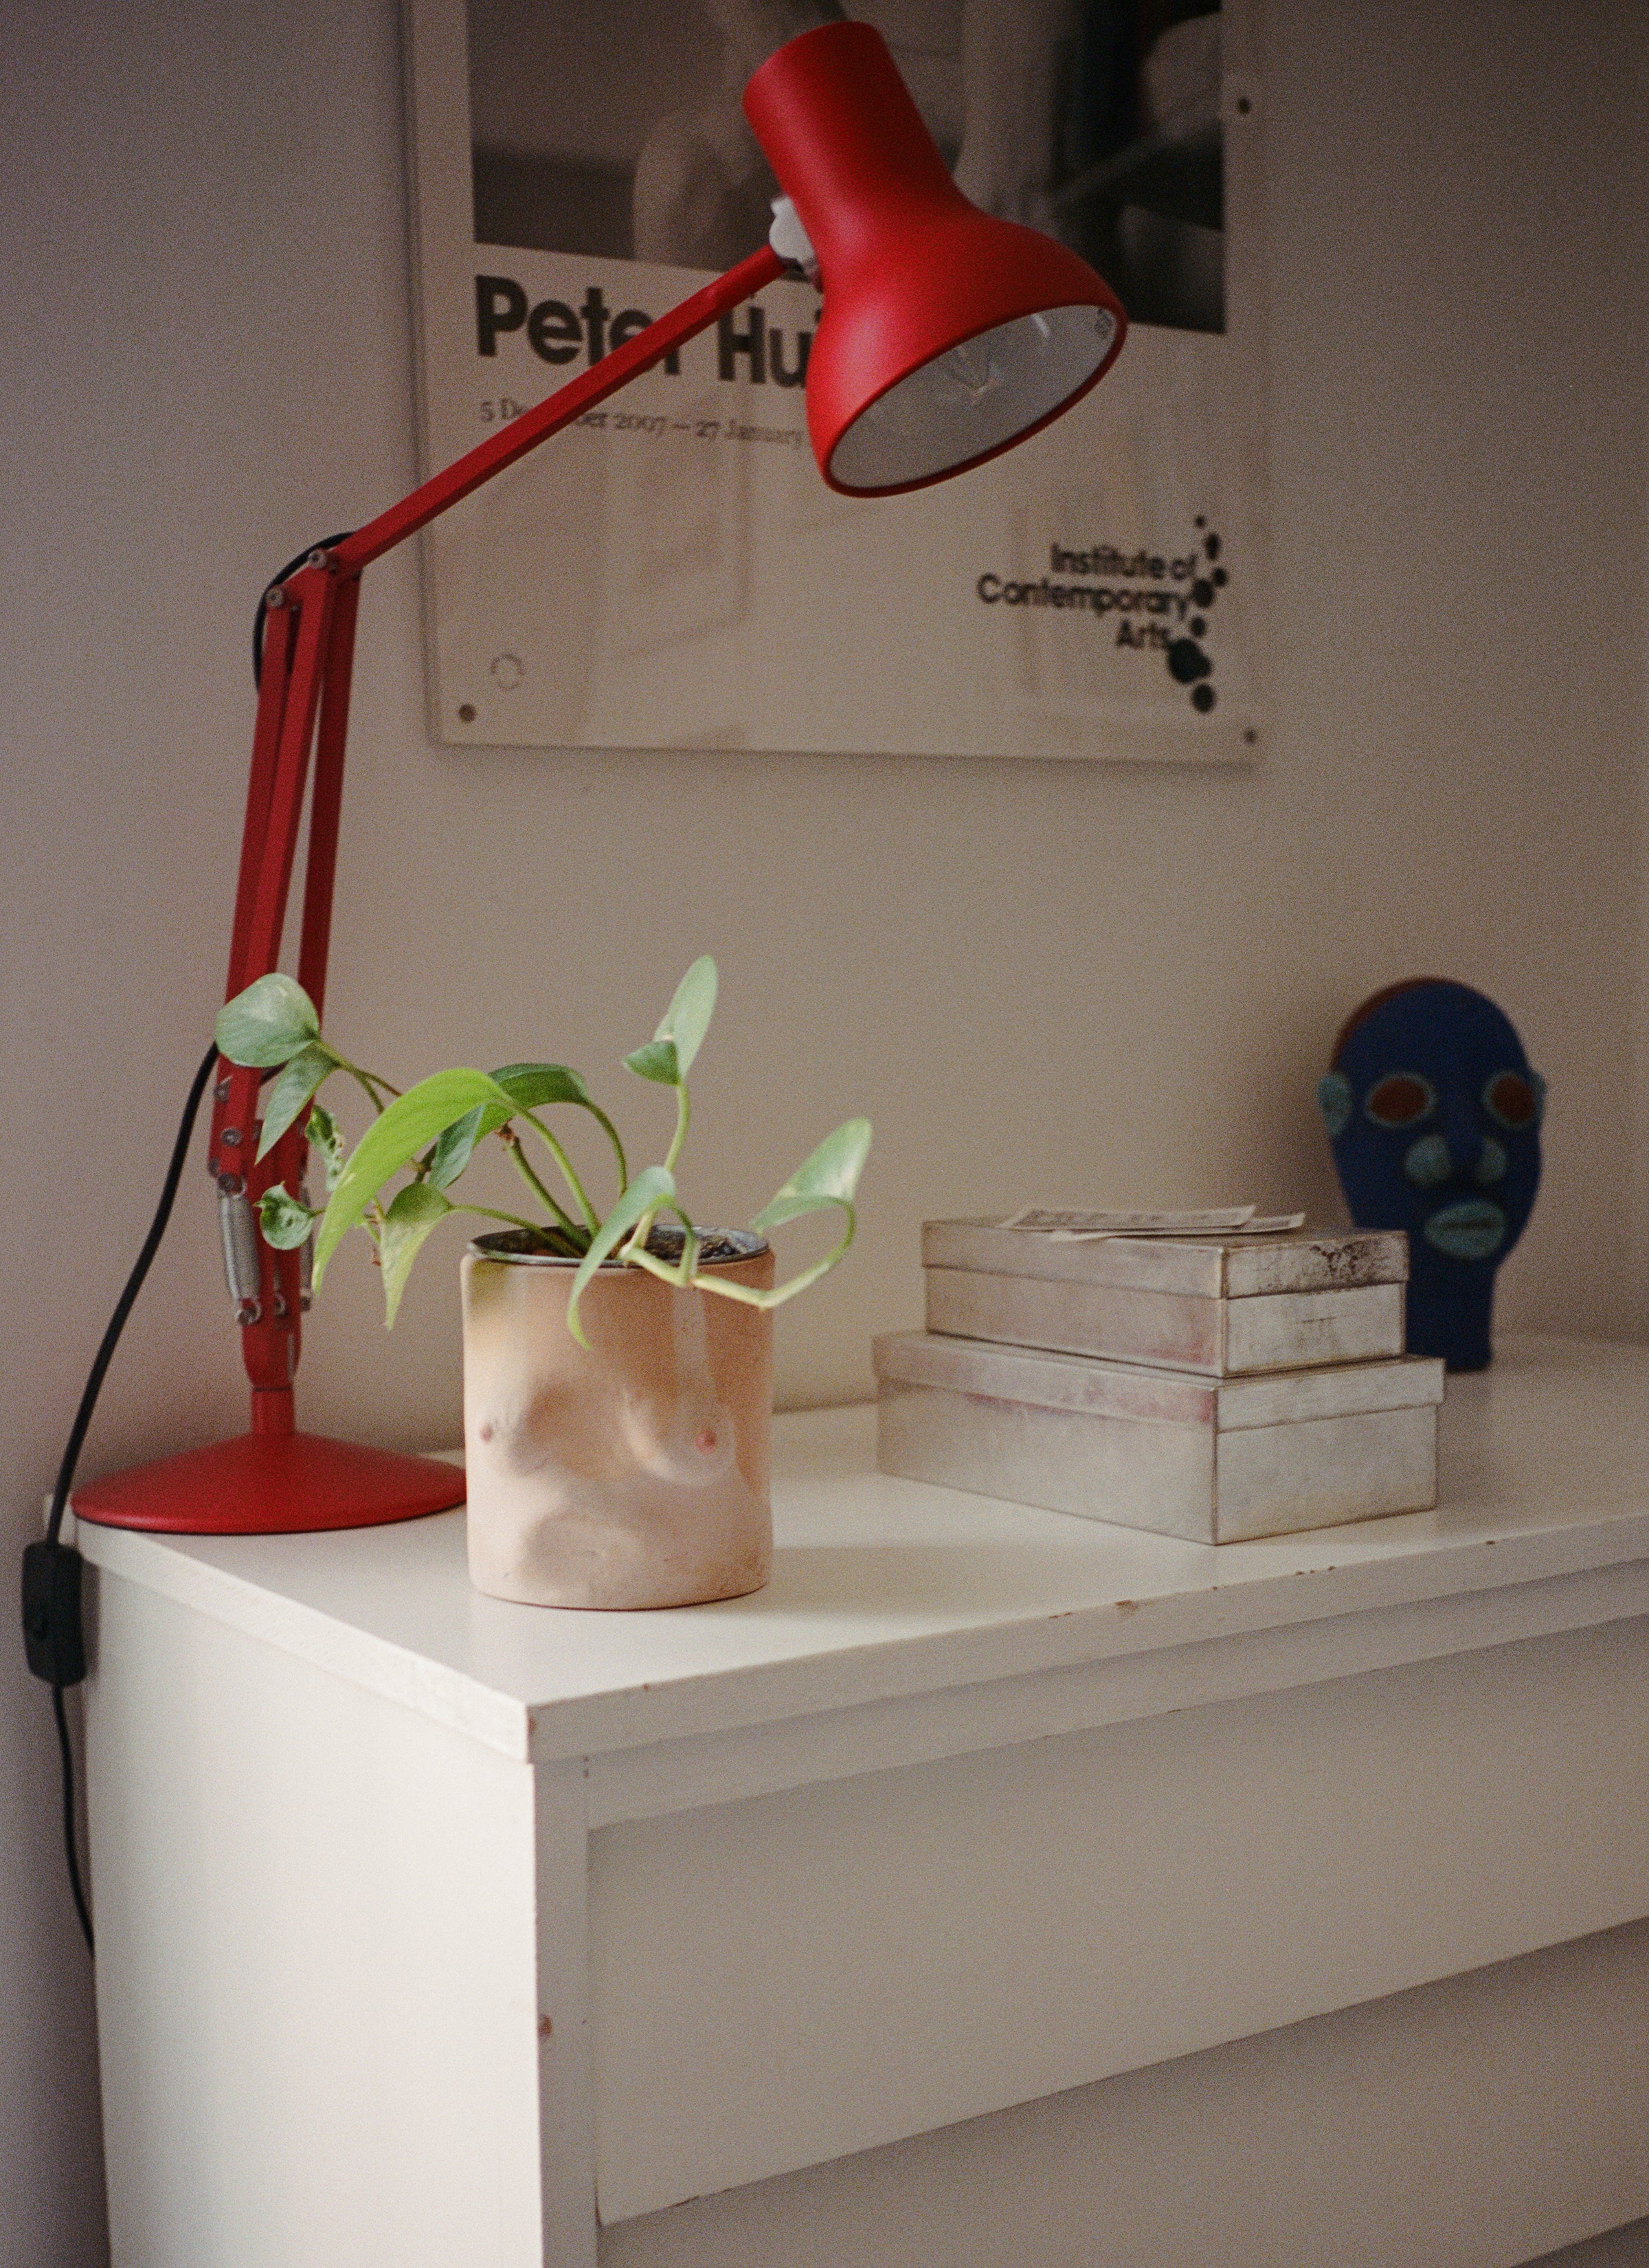 A pot of plants next to a red table lamp and a few box-like objects on a white cupboard. And there is a framed poster hung on the wall.